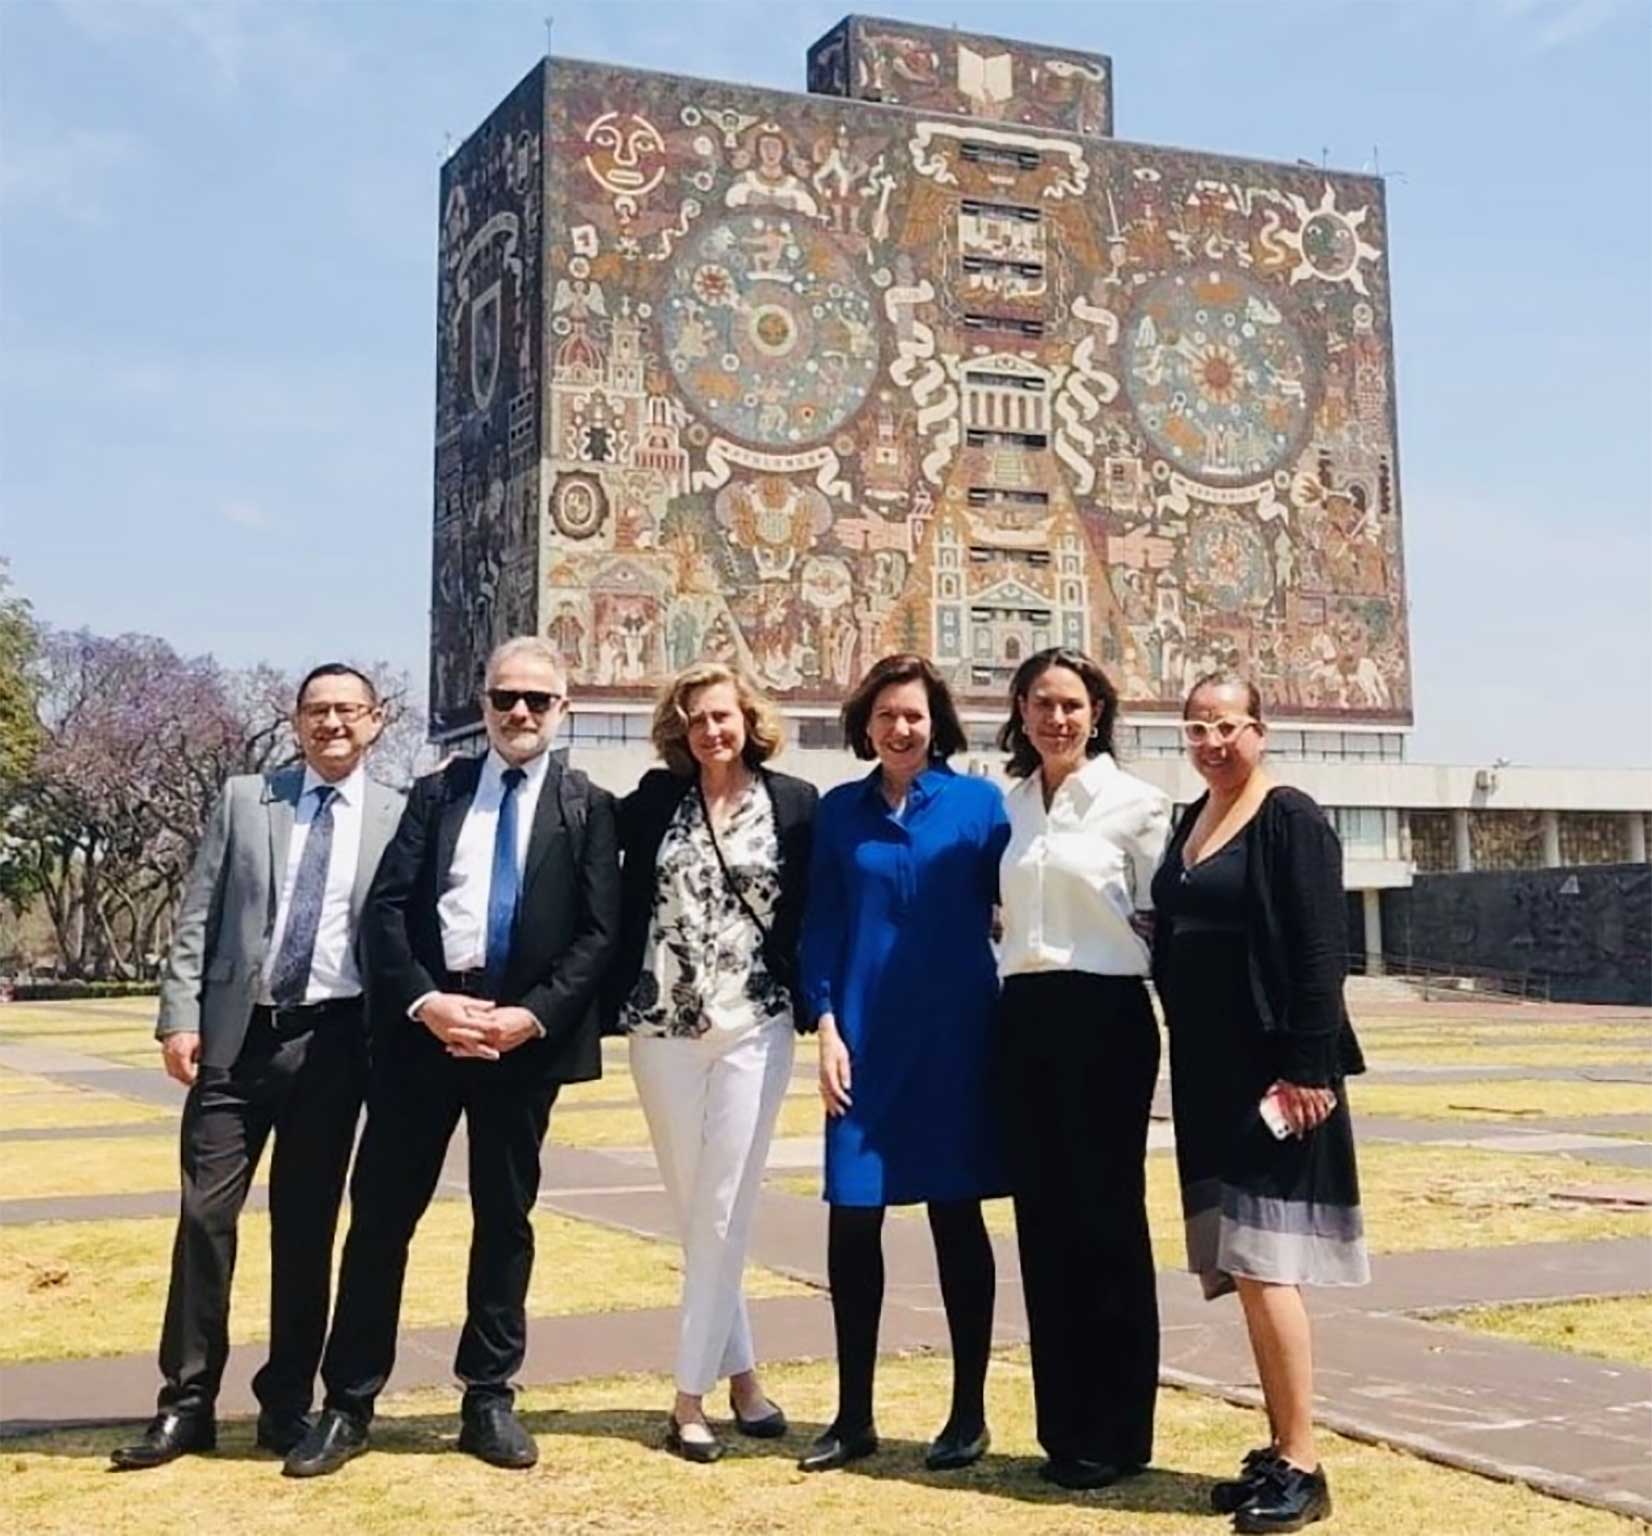 Professor Félix-Brasdefer, President Whitten, and members of the Office of the Vice President for International Affairs visit the Mexico City Gateway.